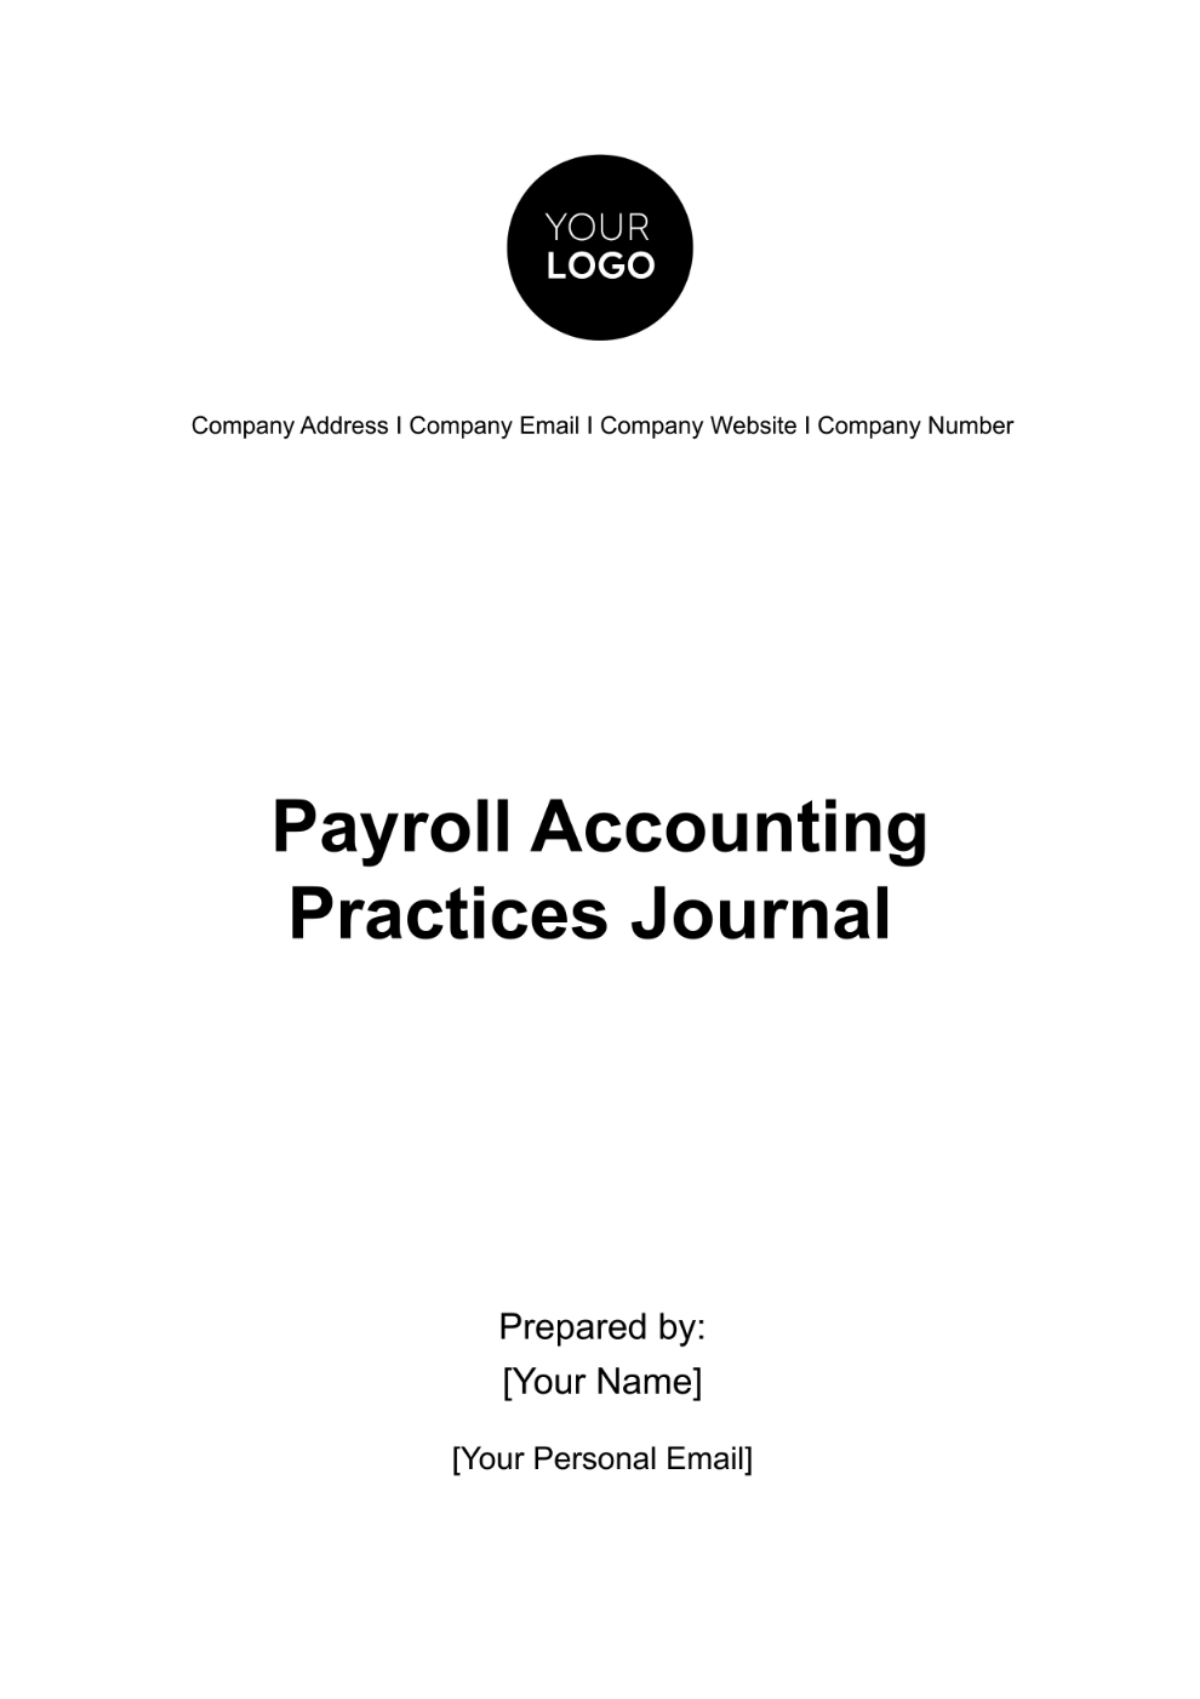 Payroll Accounting Practices Journal Template